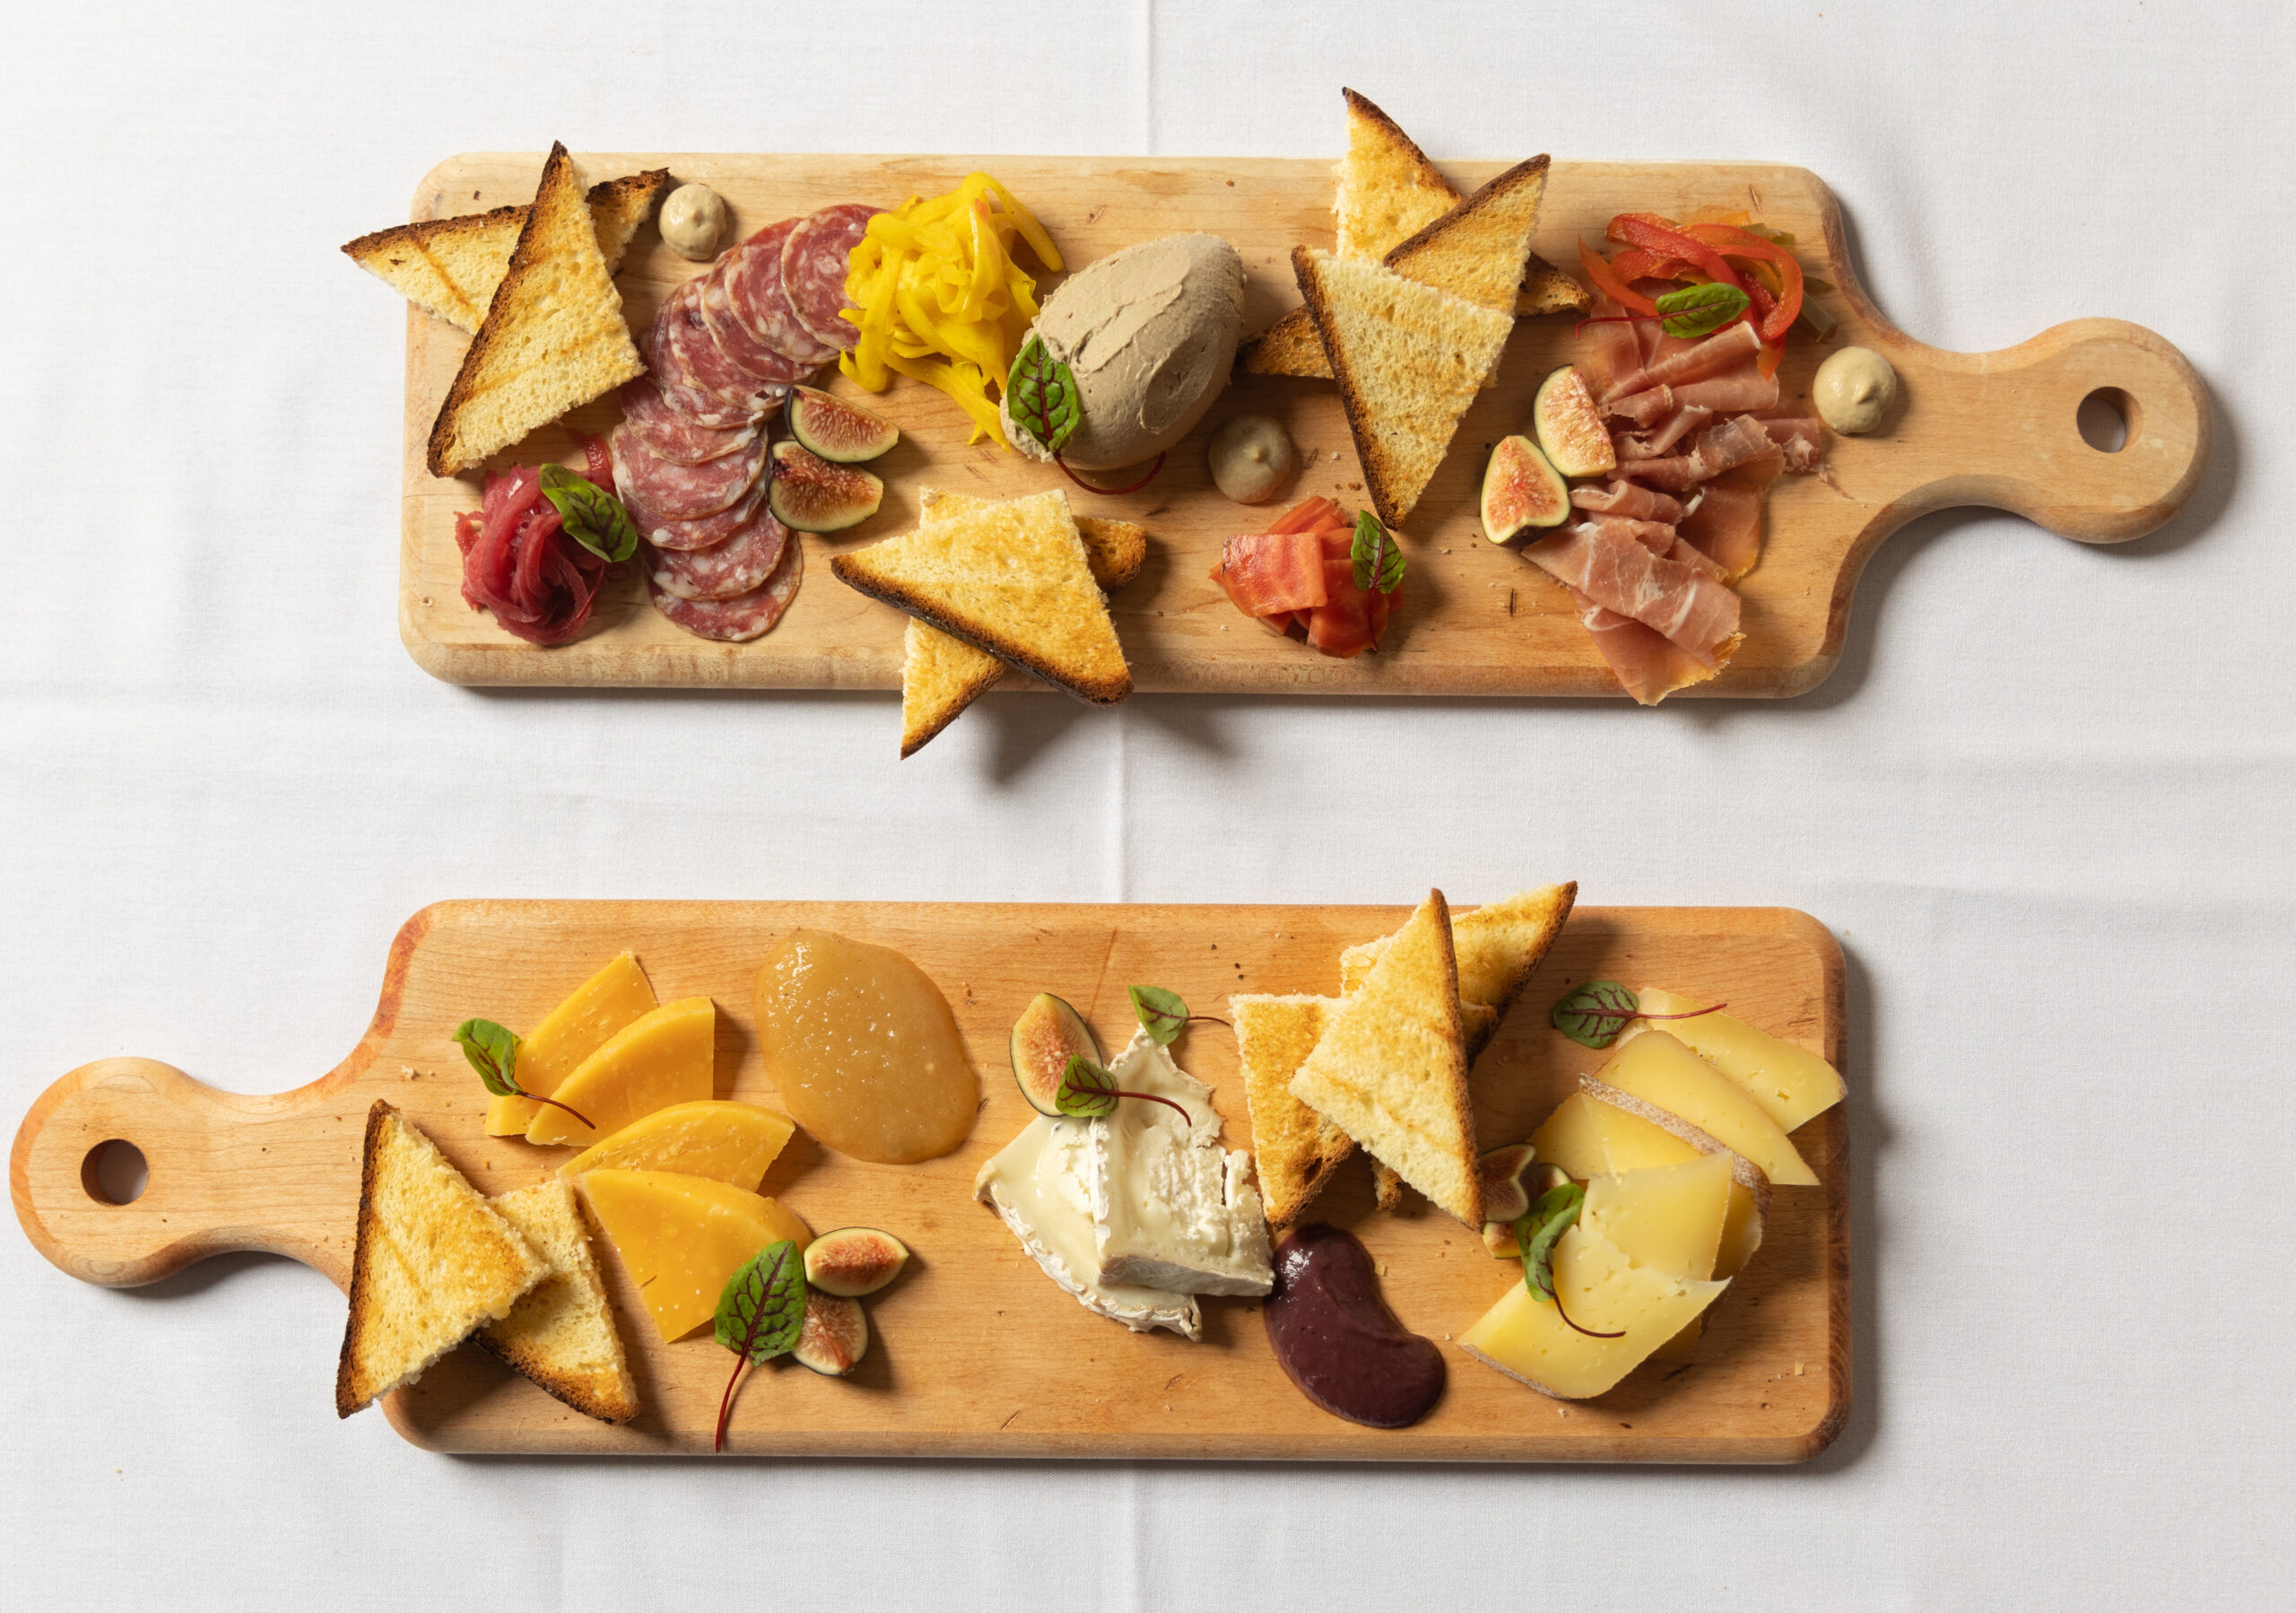 Lulu Kitchen & Bar cheese and charcuterie platter is available to go for the holidays. CARL TIMPONE